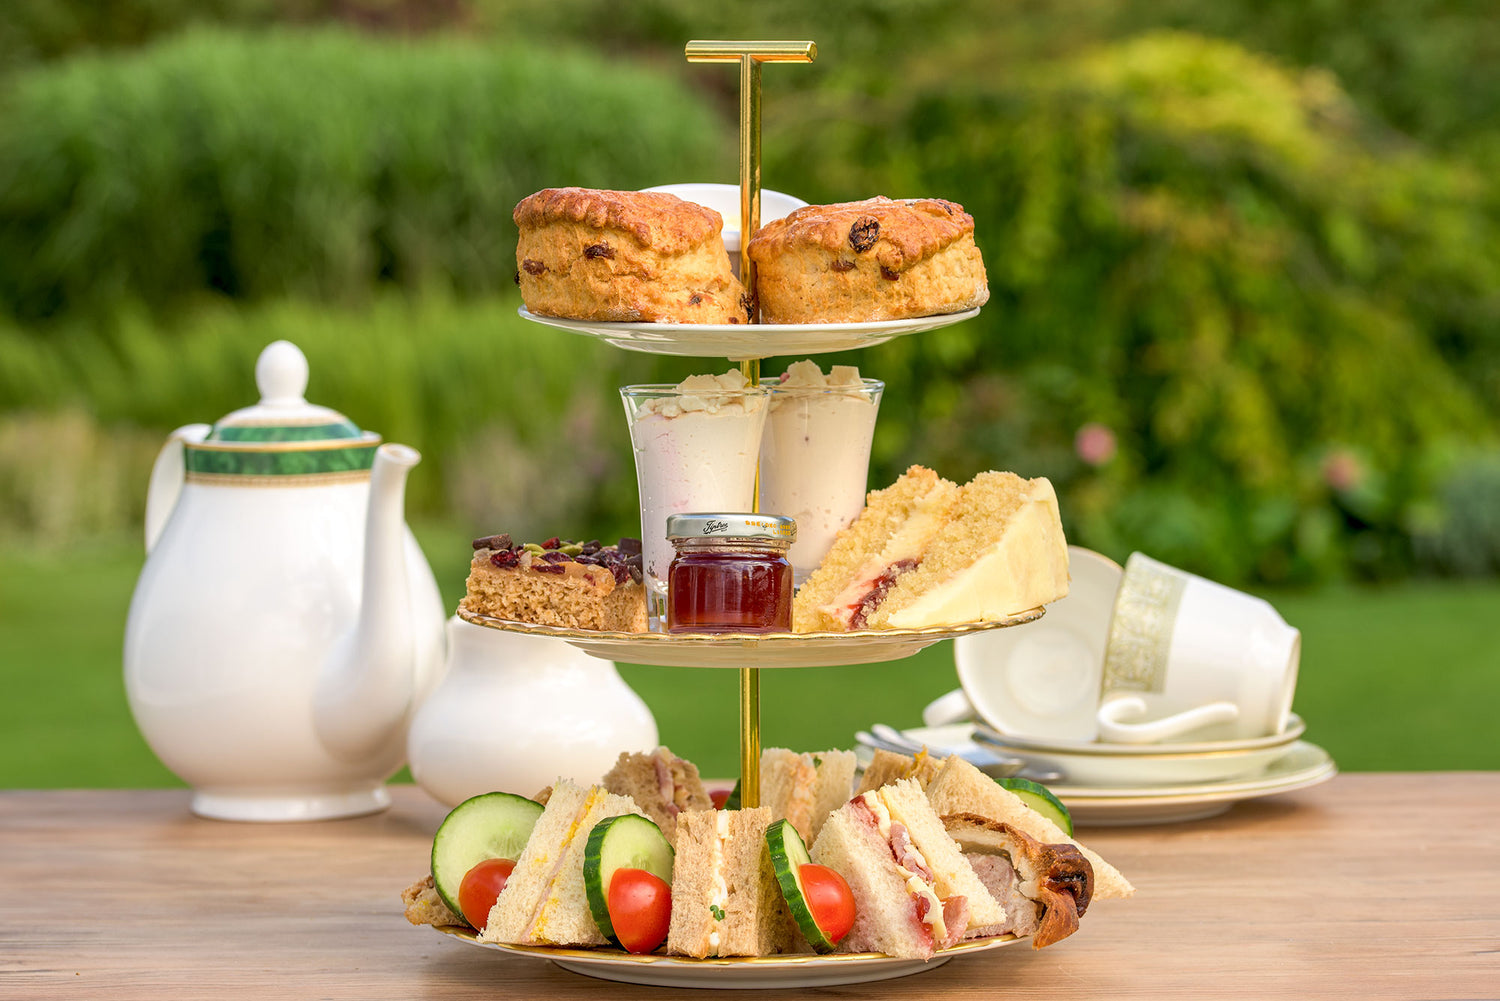 Barnsdale Afternoon Tea from The Helenium Tea Room at Barnsdale Gardens